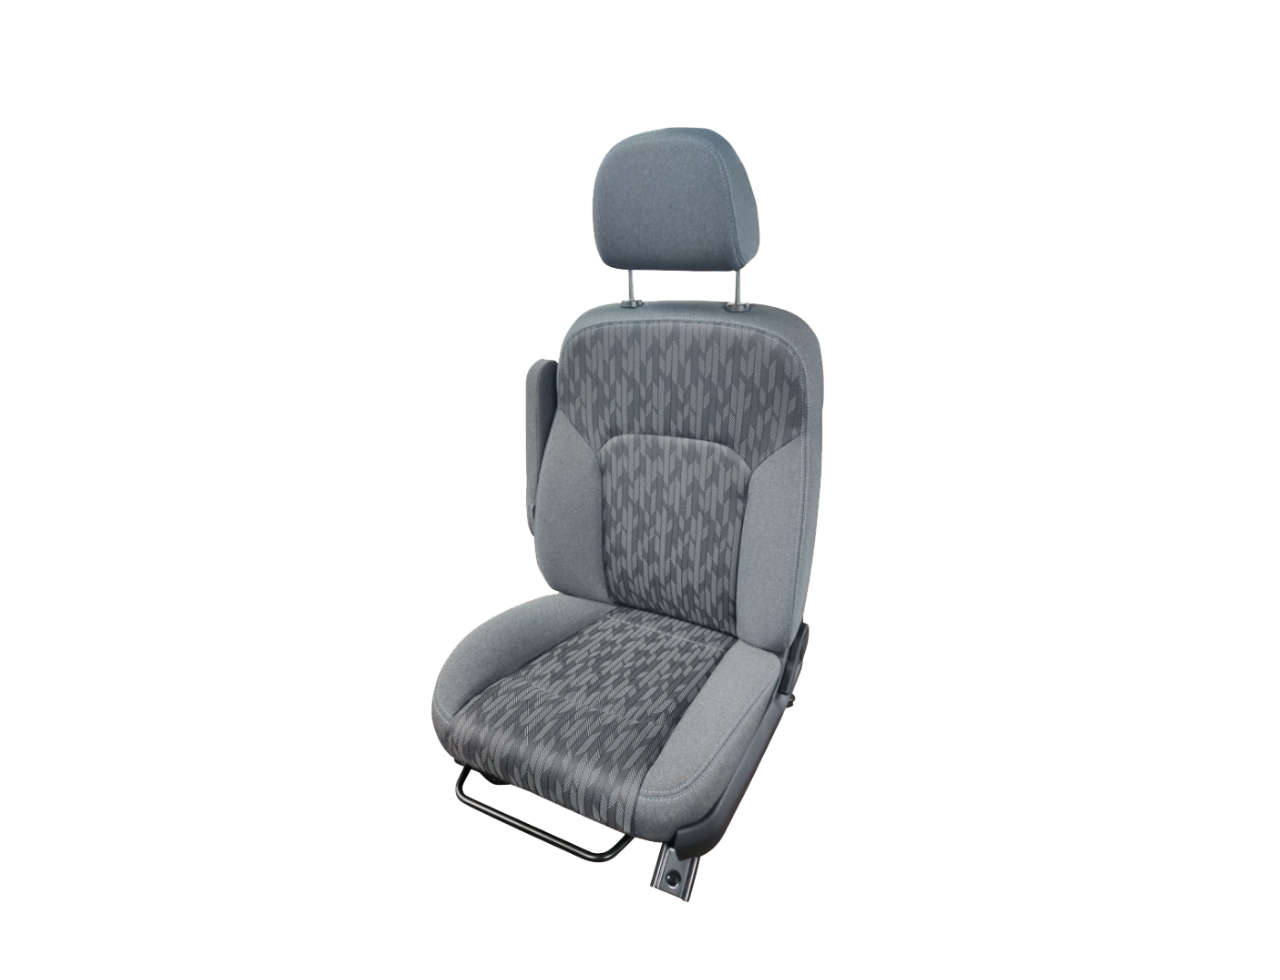 Light Truck YTST02A Driver Seat with Airbag Shock Absorption